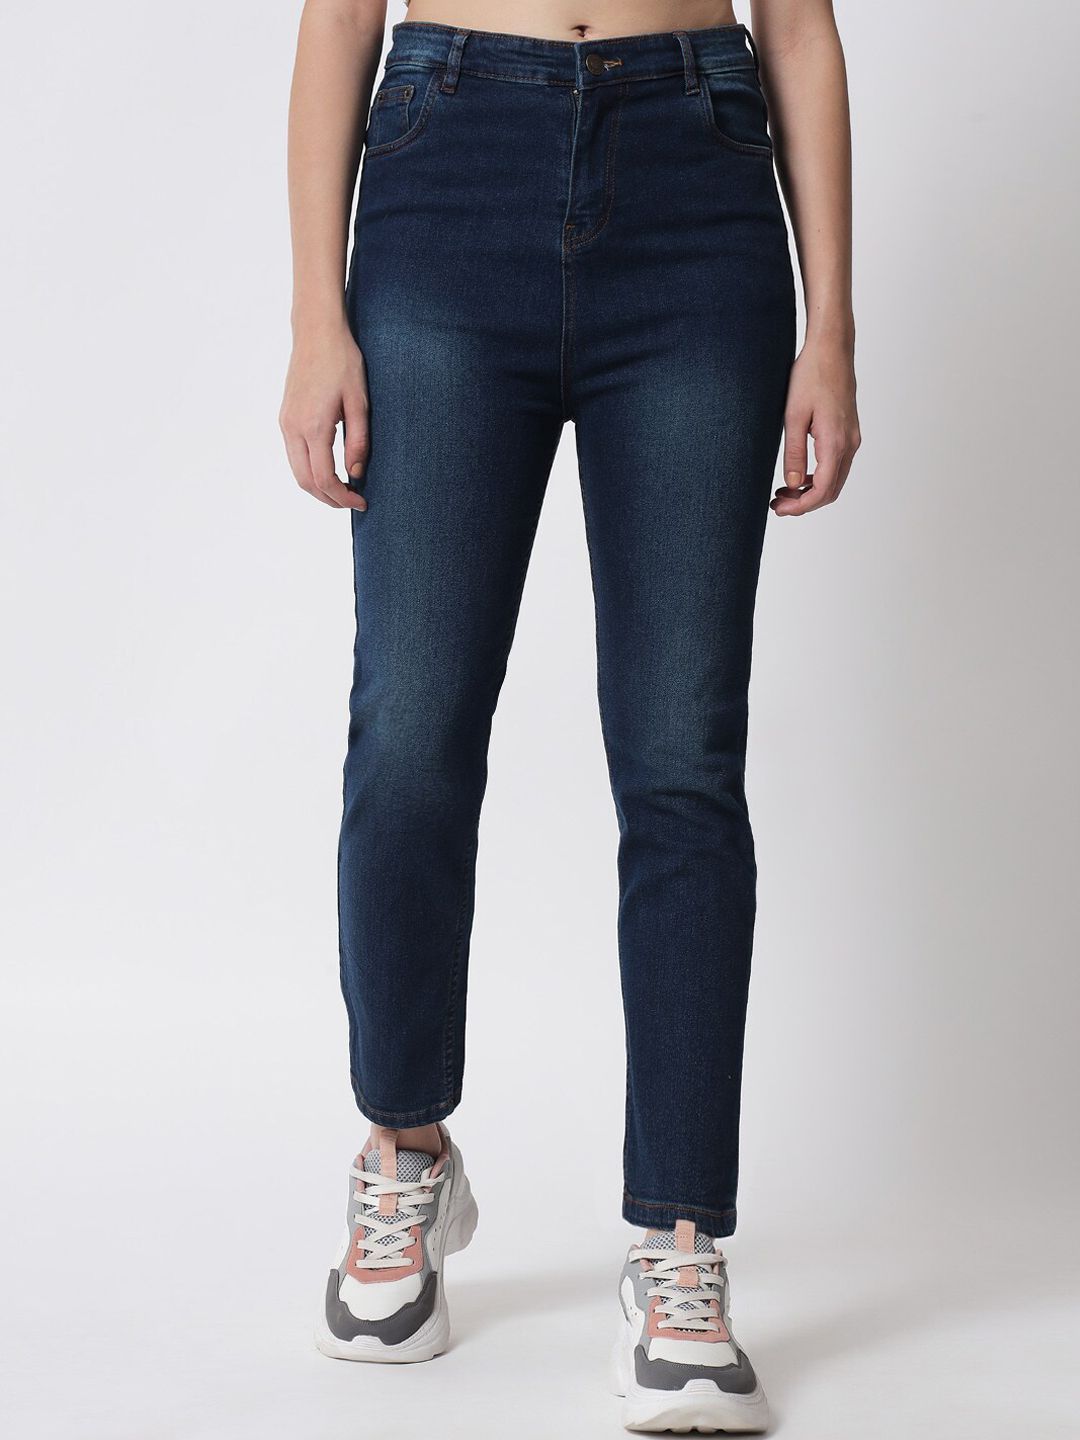 Q-rious Women Blue High-Rise Light Fade Stretchable Jeans Price in India